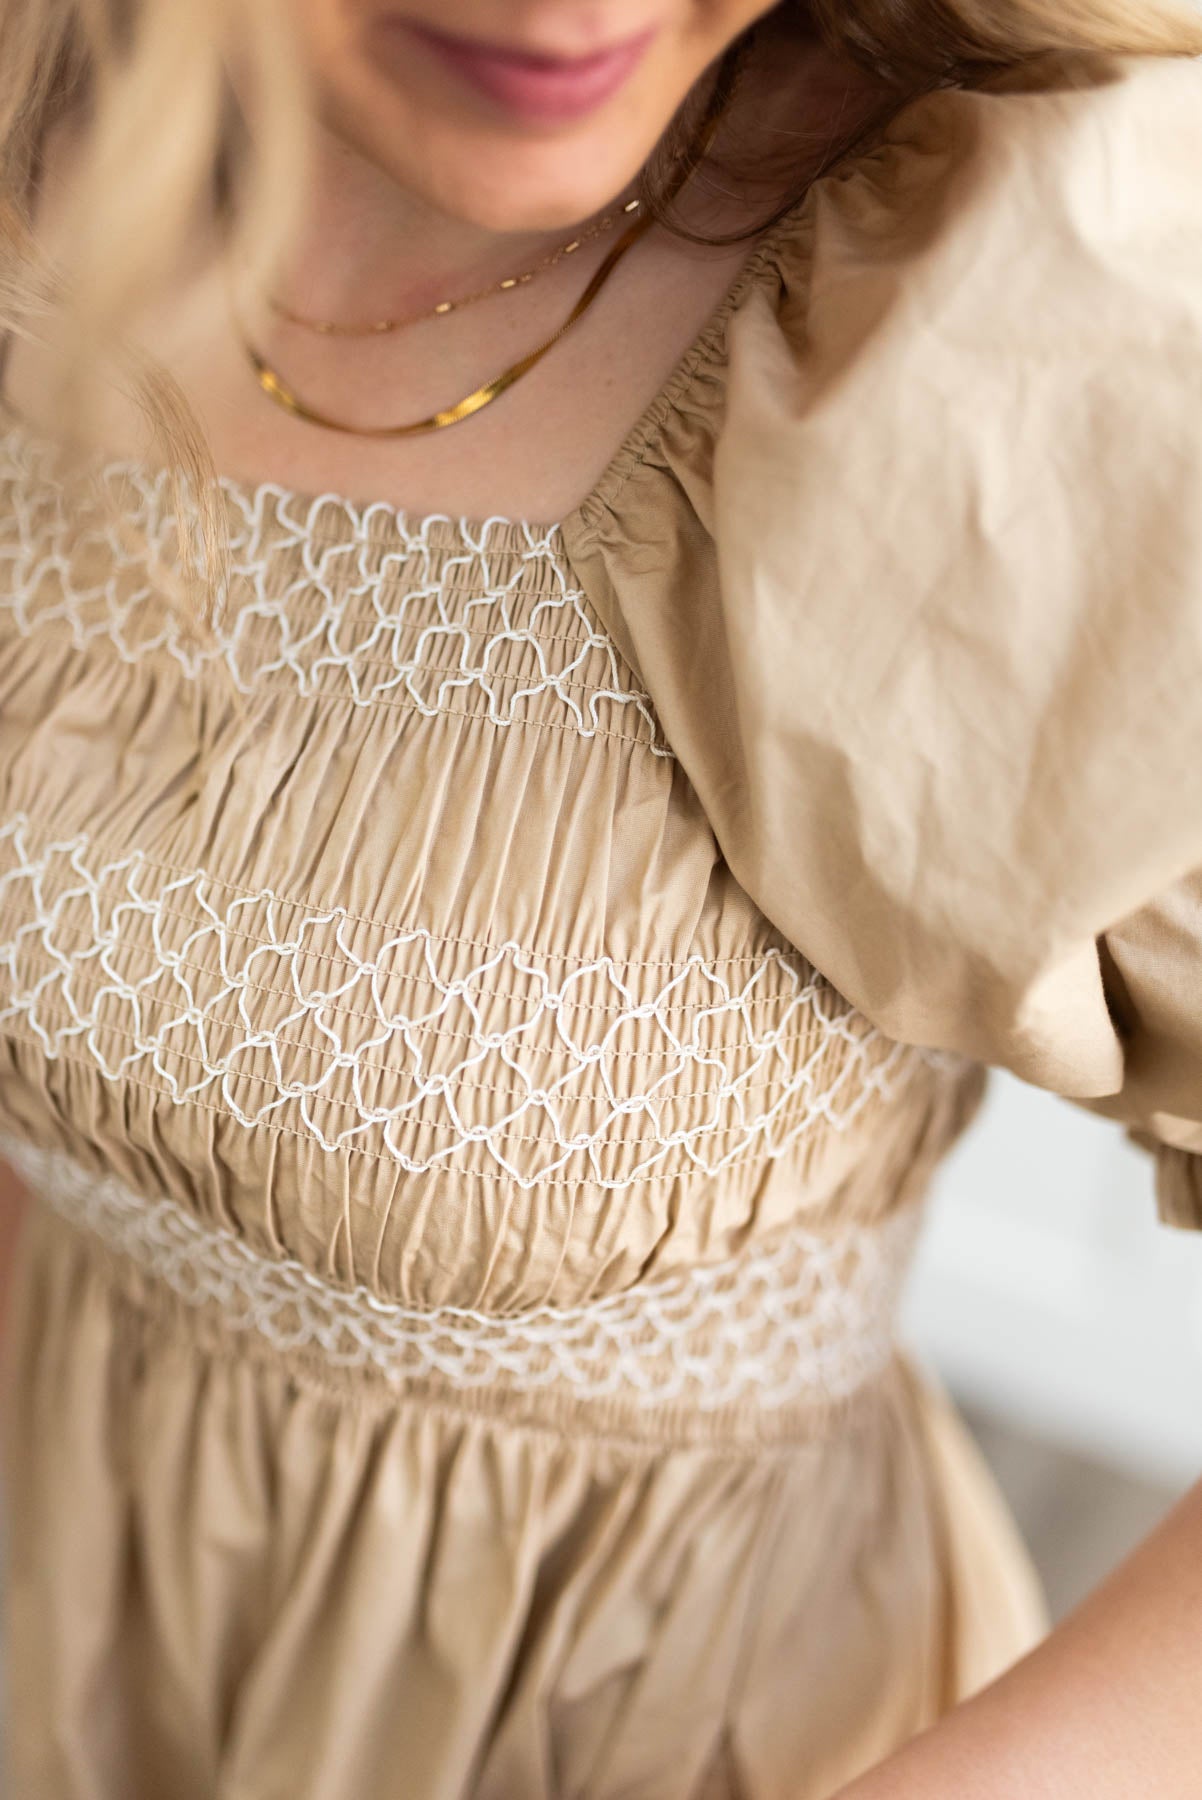 Taupe dress with a close up of the smocked bodice